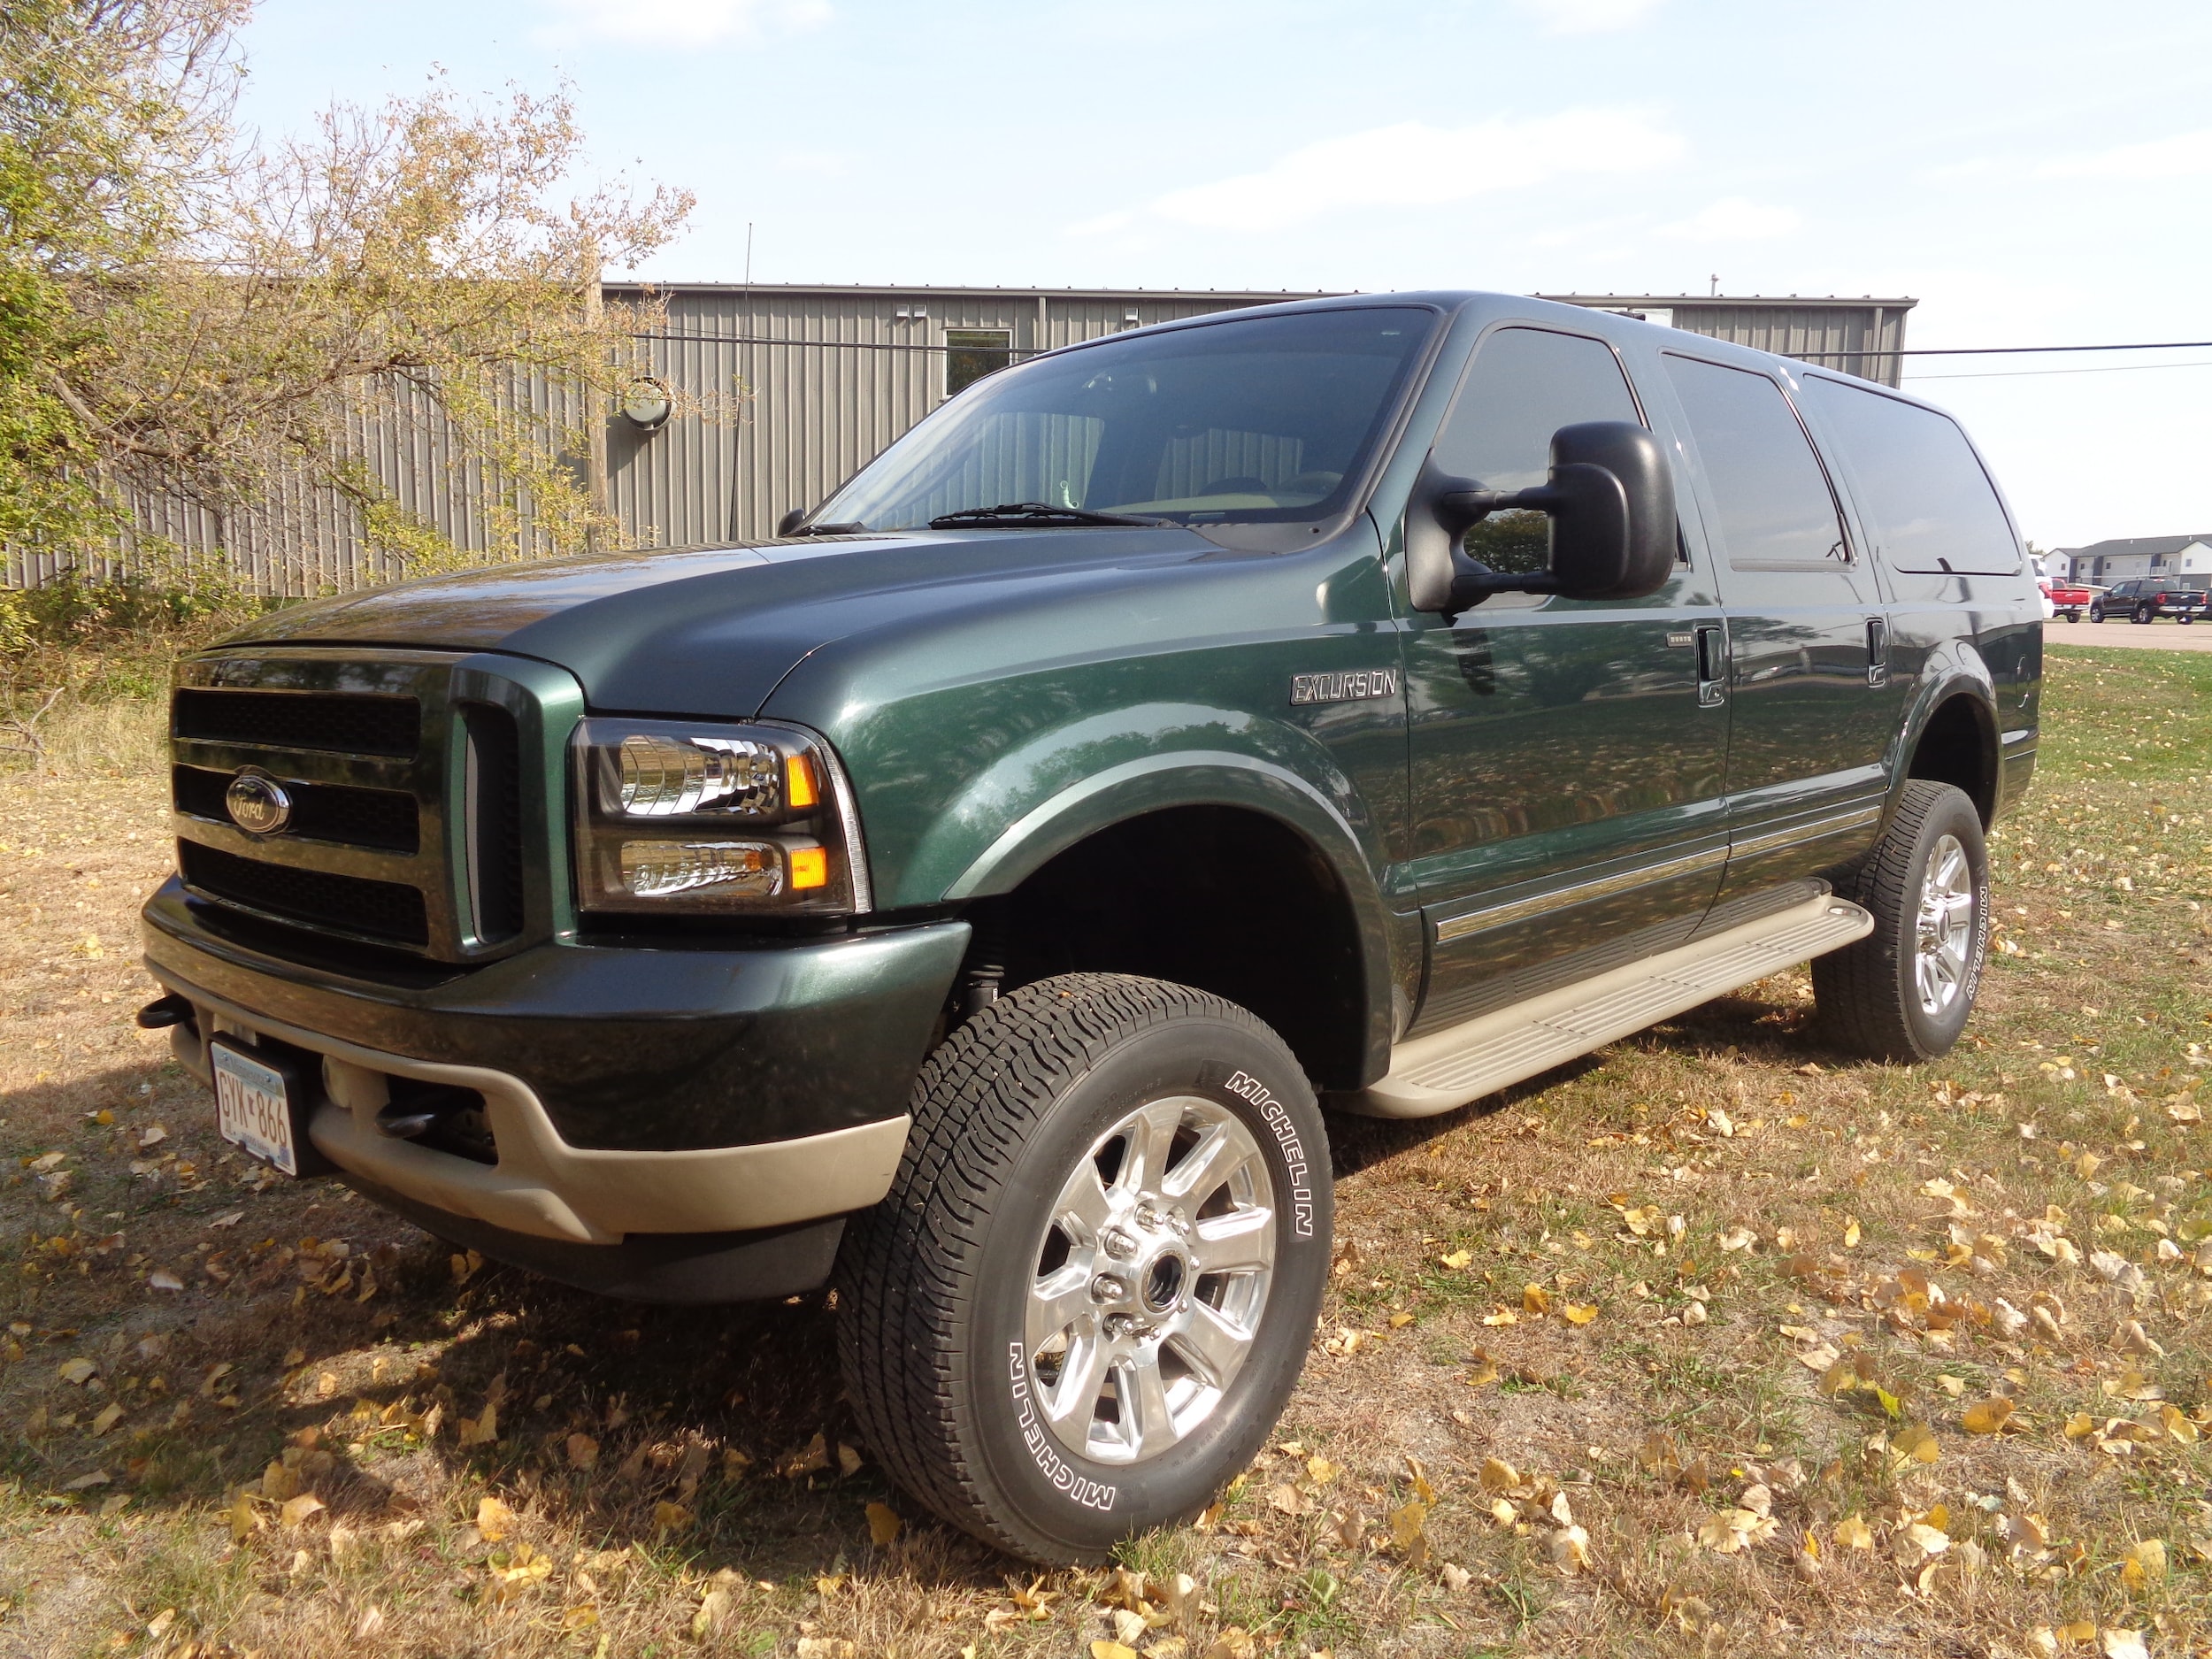 Used 2003 Ford Excursion Limited with VIN 1FMNU43S53EC54269 for sale in Luverne, MN